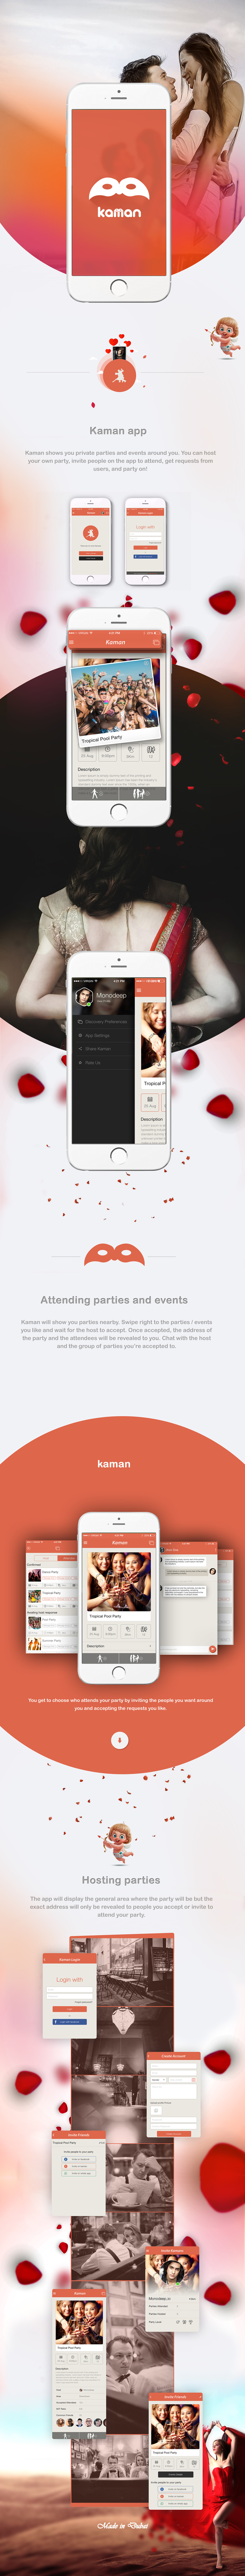 Event parties party on dating app Social Networking host your own party iOS App dubai UAE monodeep design latest app design ios9 iphone app